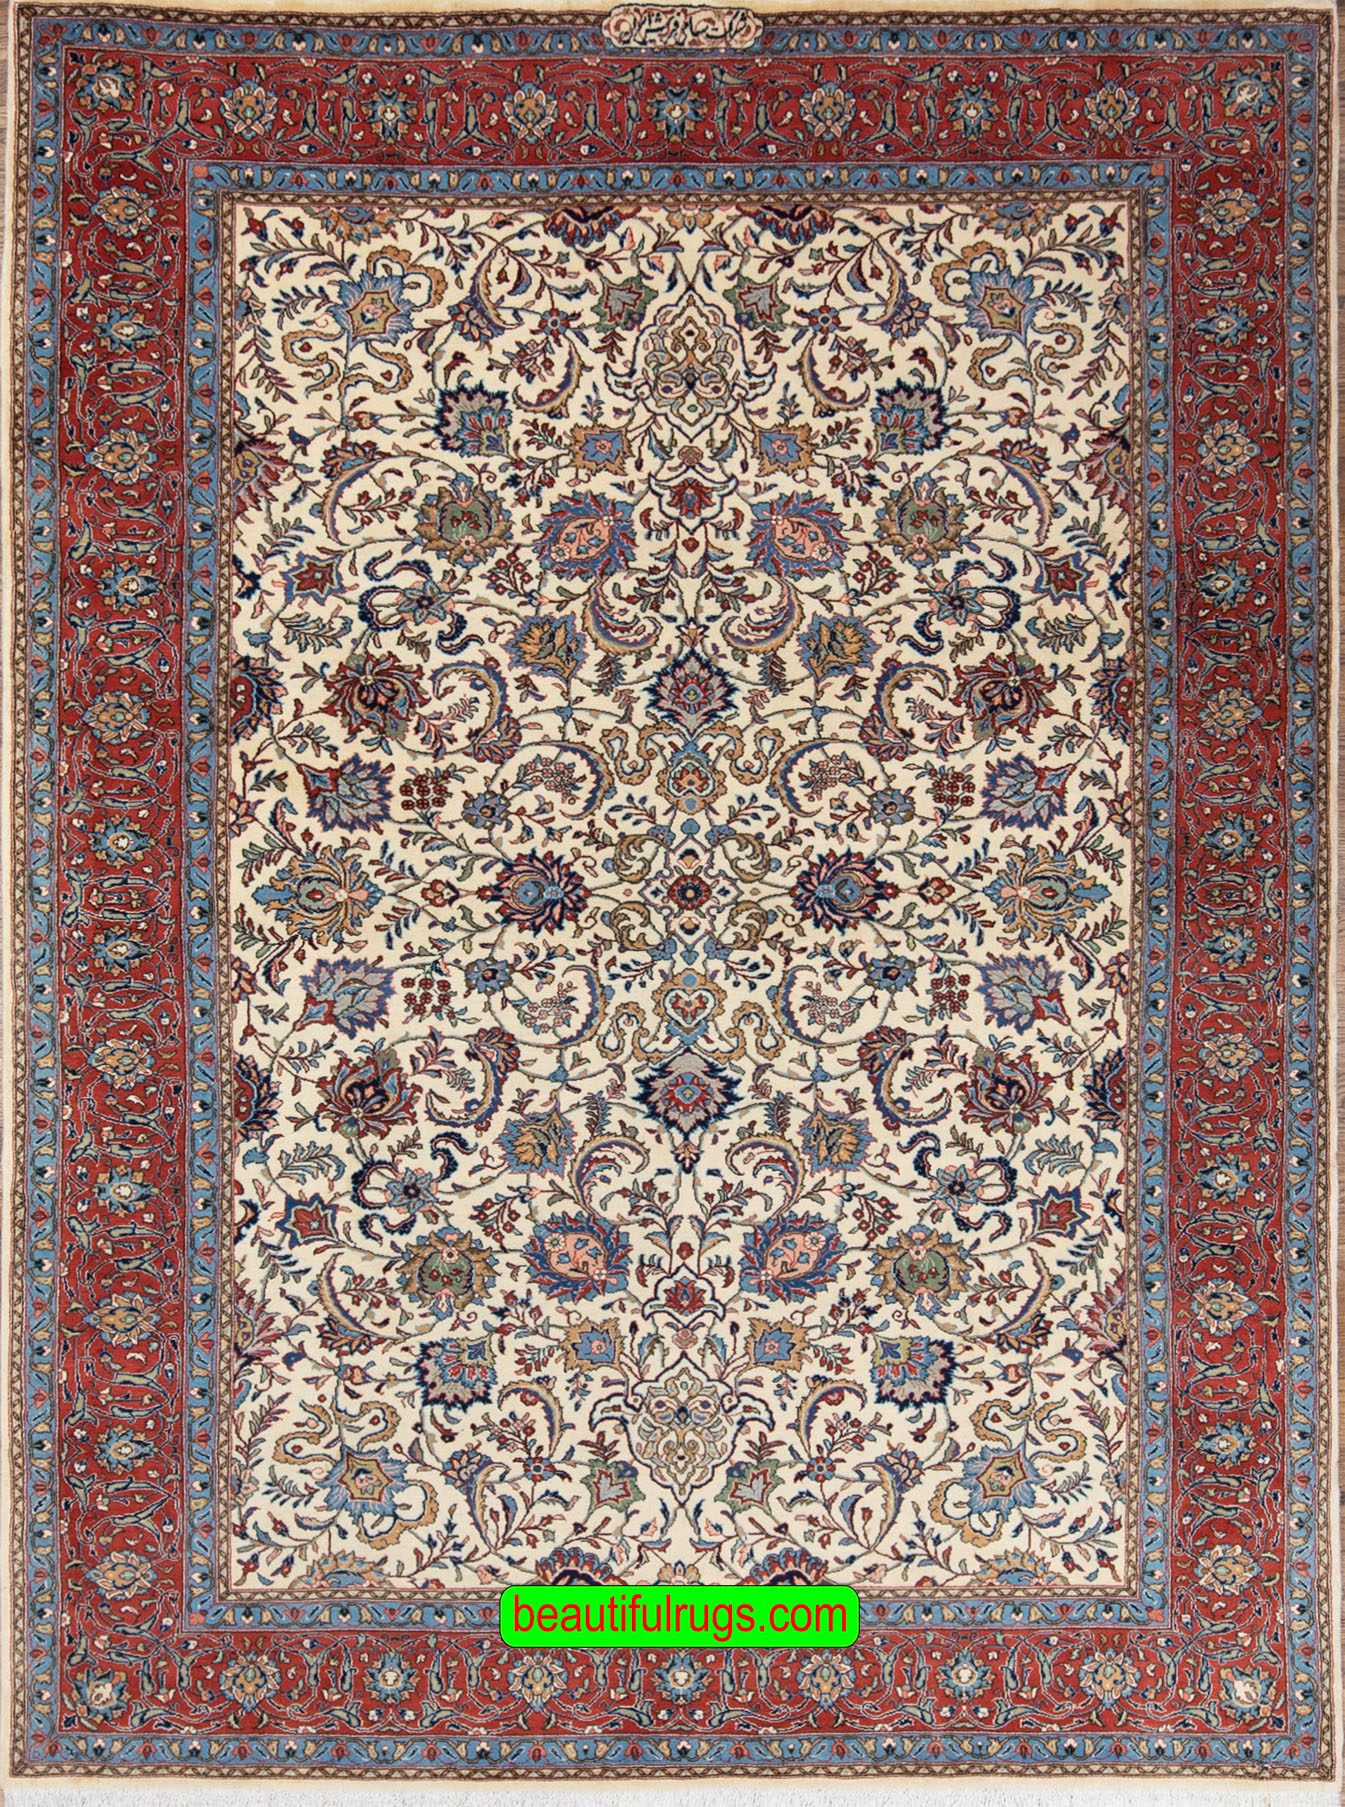 Handmade Persian Sarouk wool rug in beige and rustic red, floral and all-over design. Size 6.8x10.